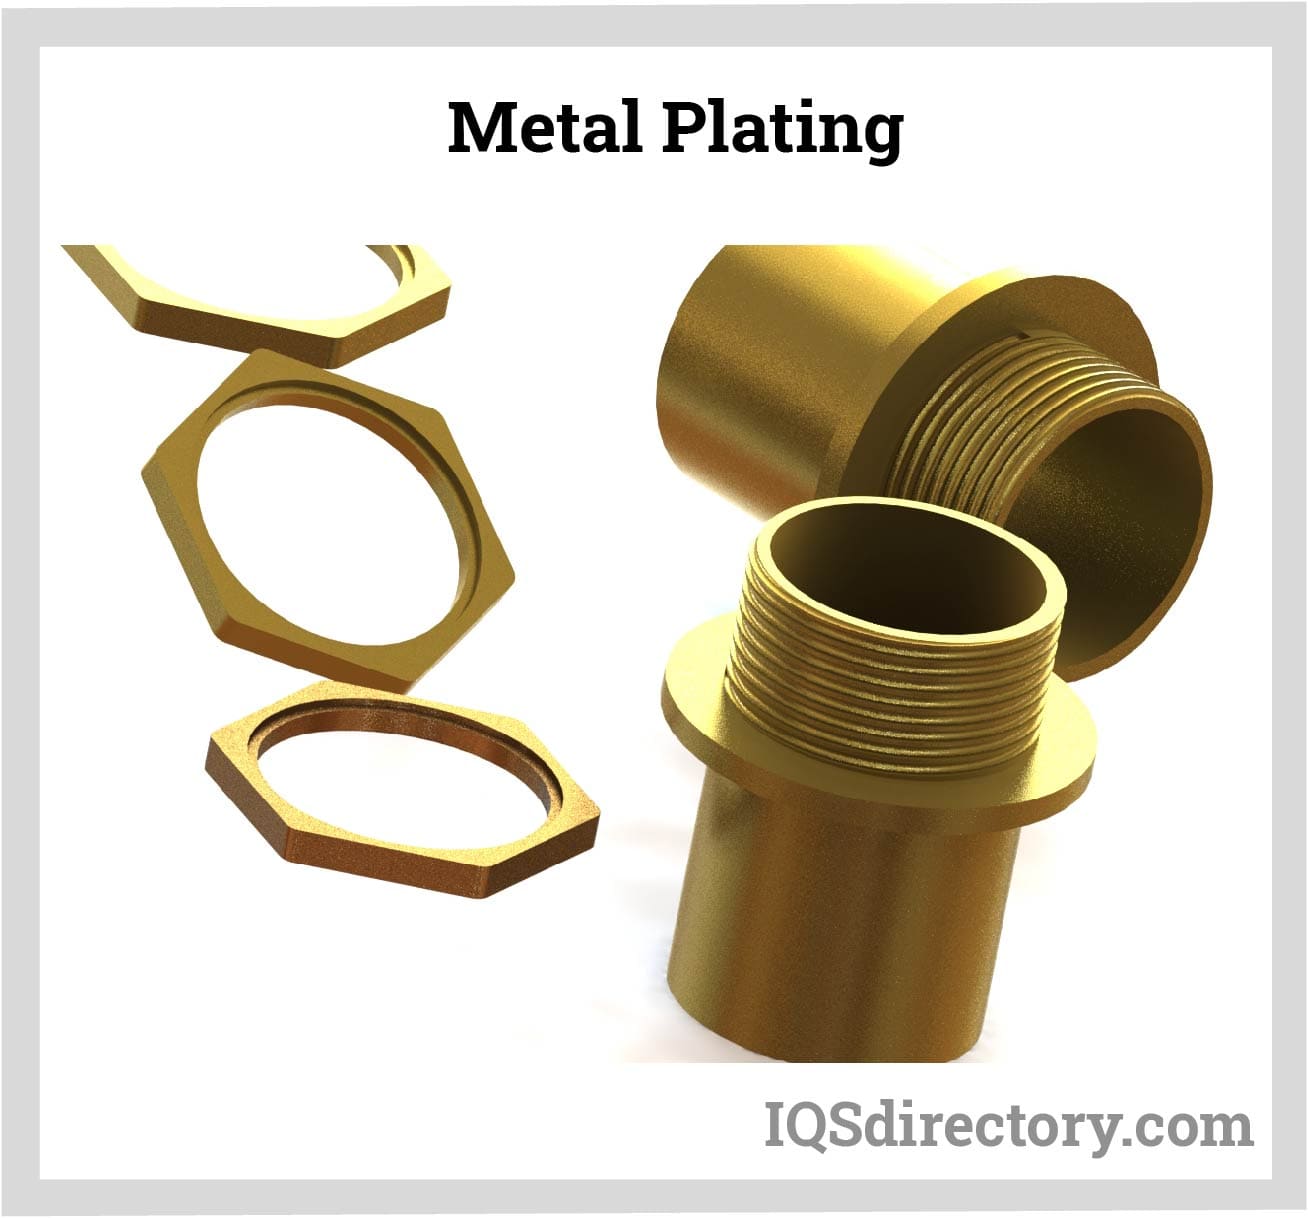 Types of Metal Plating: Metal, Types, Applications, and Benefits